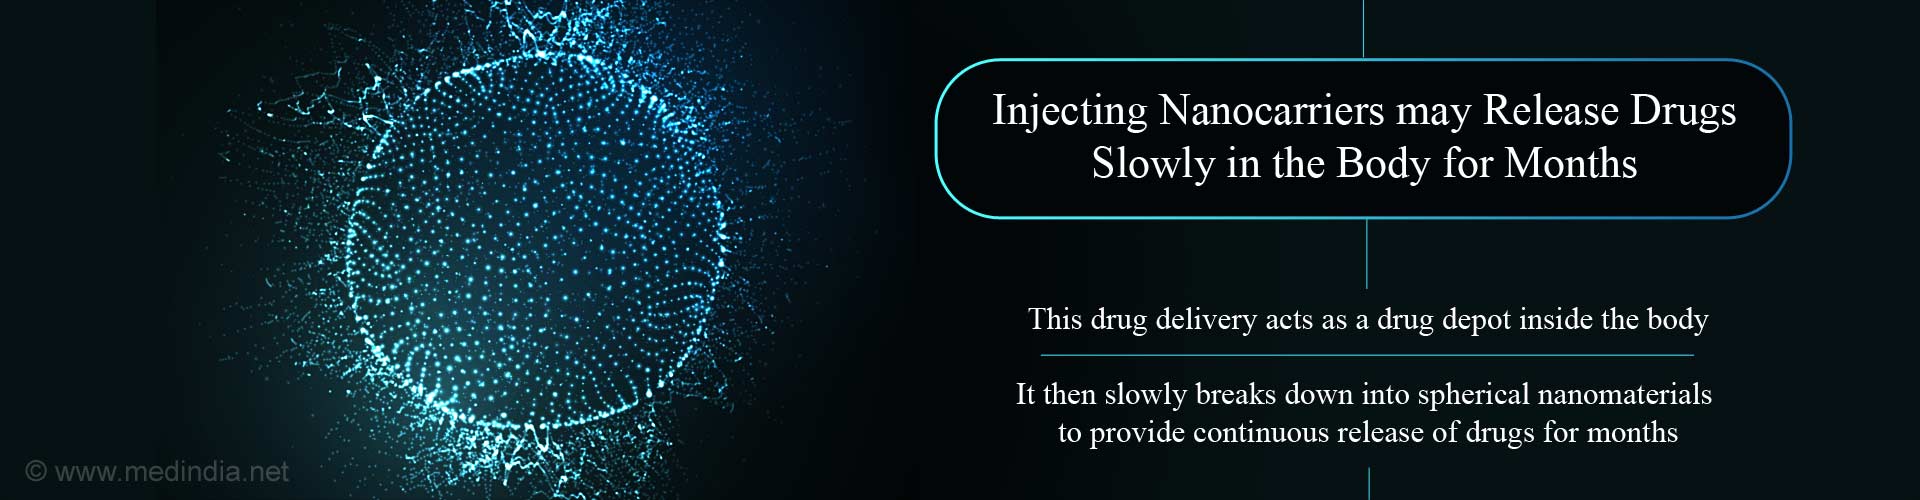 injecting nanocarriers may release drugs slowly in the body for months
- this drug delivery act as a drug depot inside the body
- it then slowly breaks down into spherical nanomaterials to provide continuous release of drugs for months
